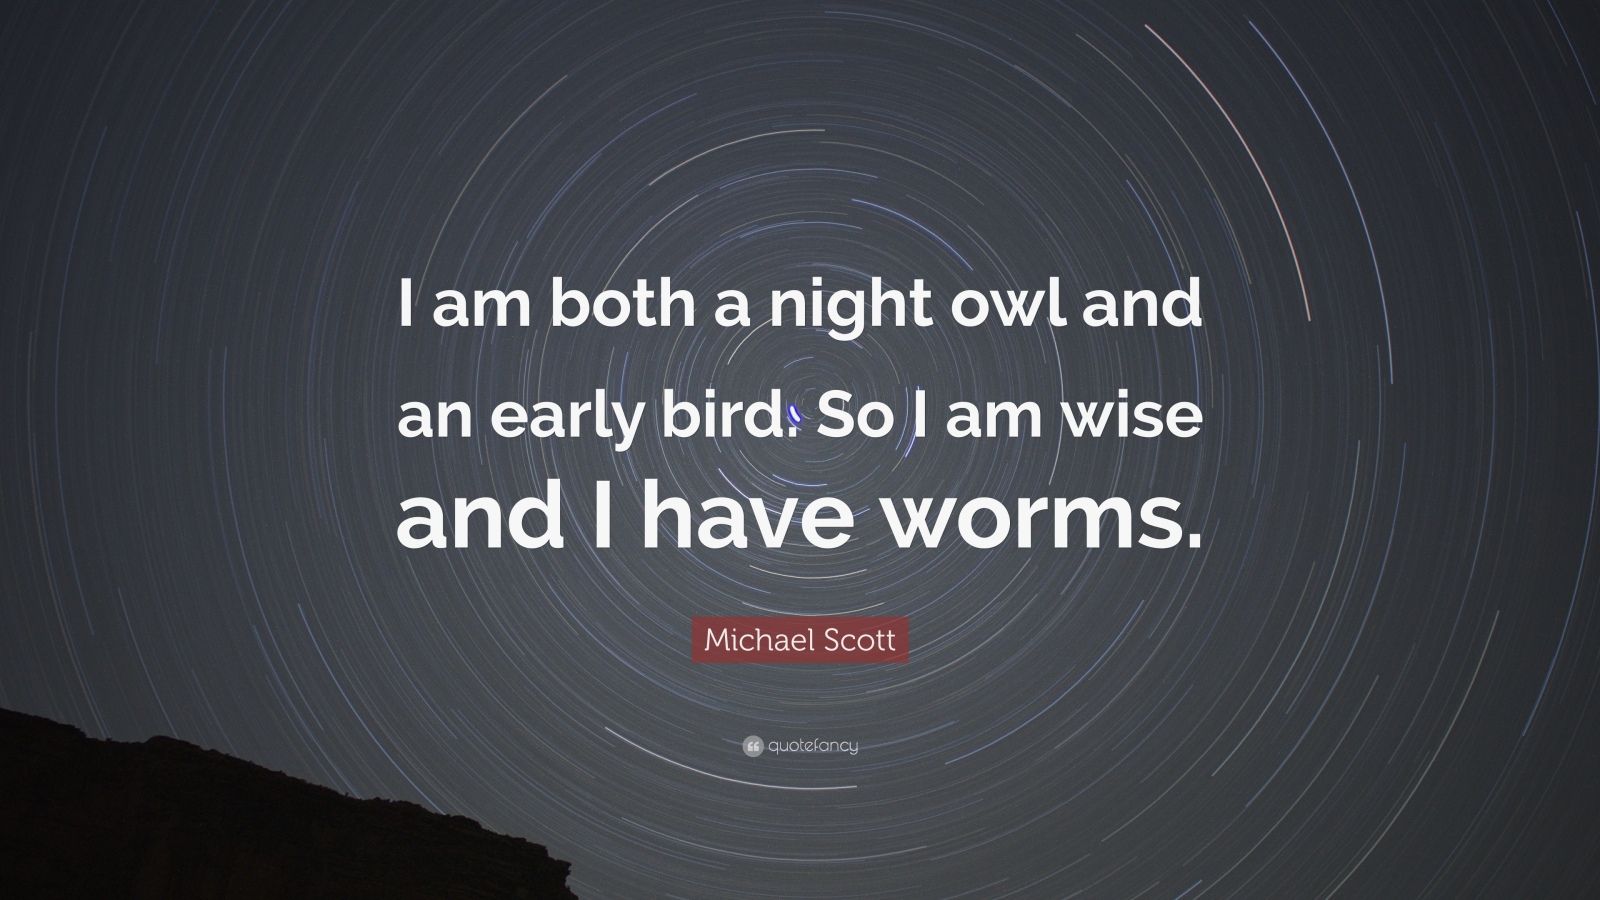 Michael Scott Quote: “I am both a night owl and an early bird. So I am